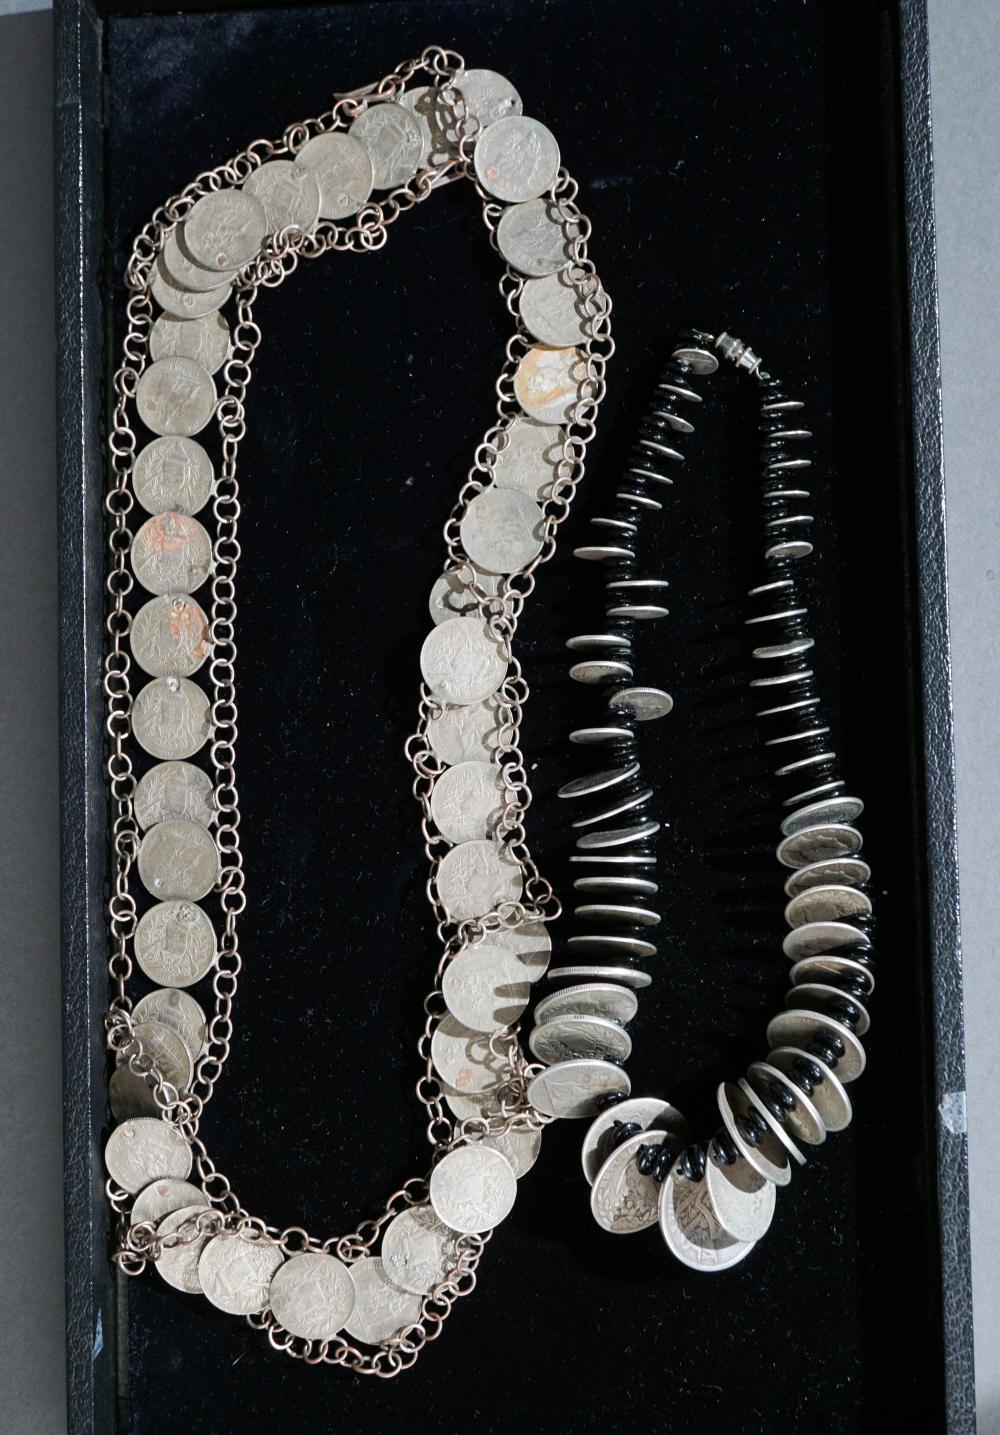 GUATEMALAN 19TH CENTURY COIN NECKLACE